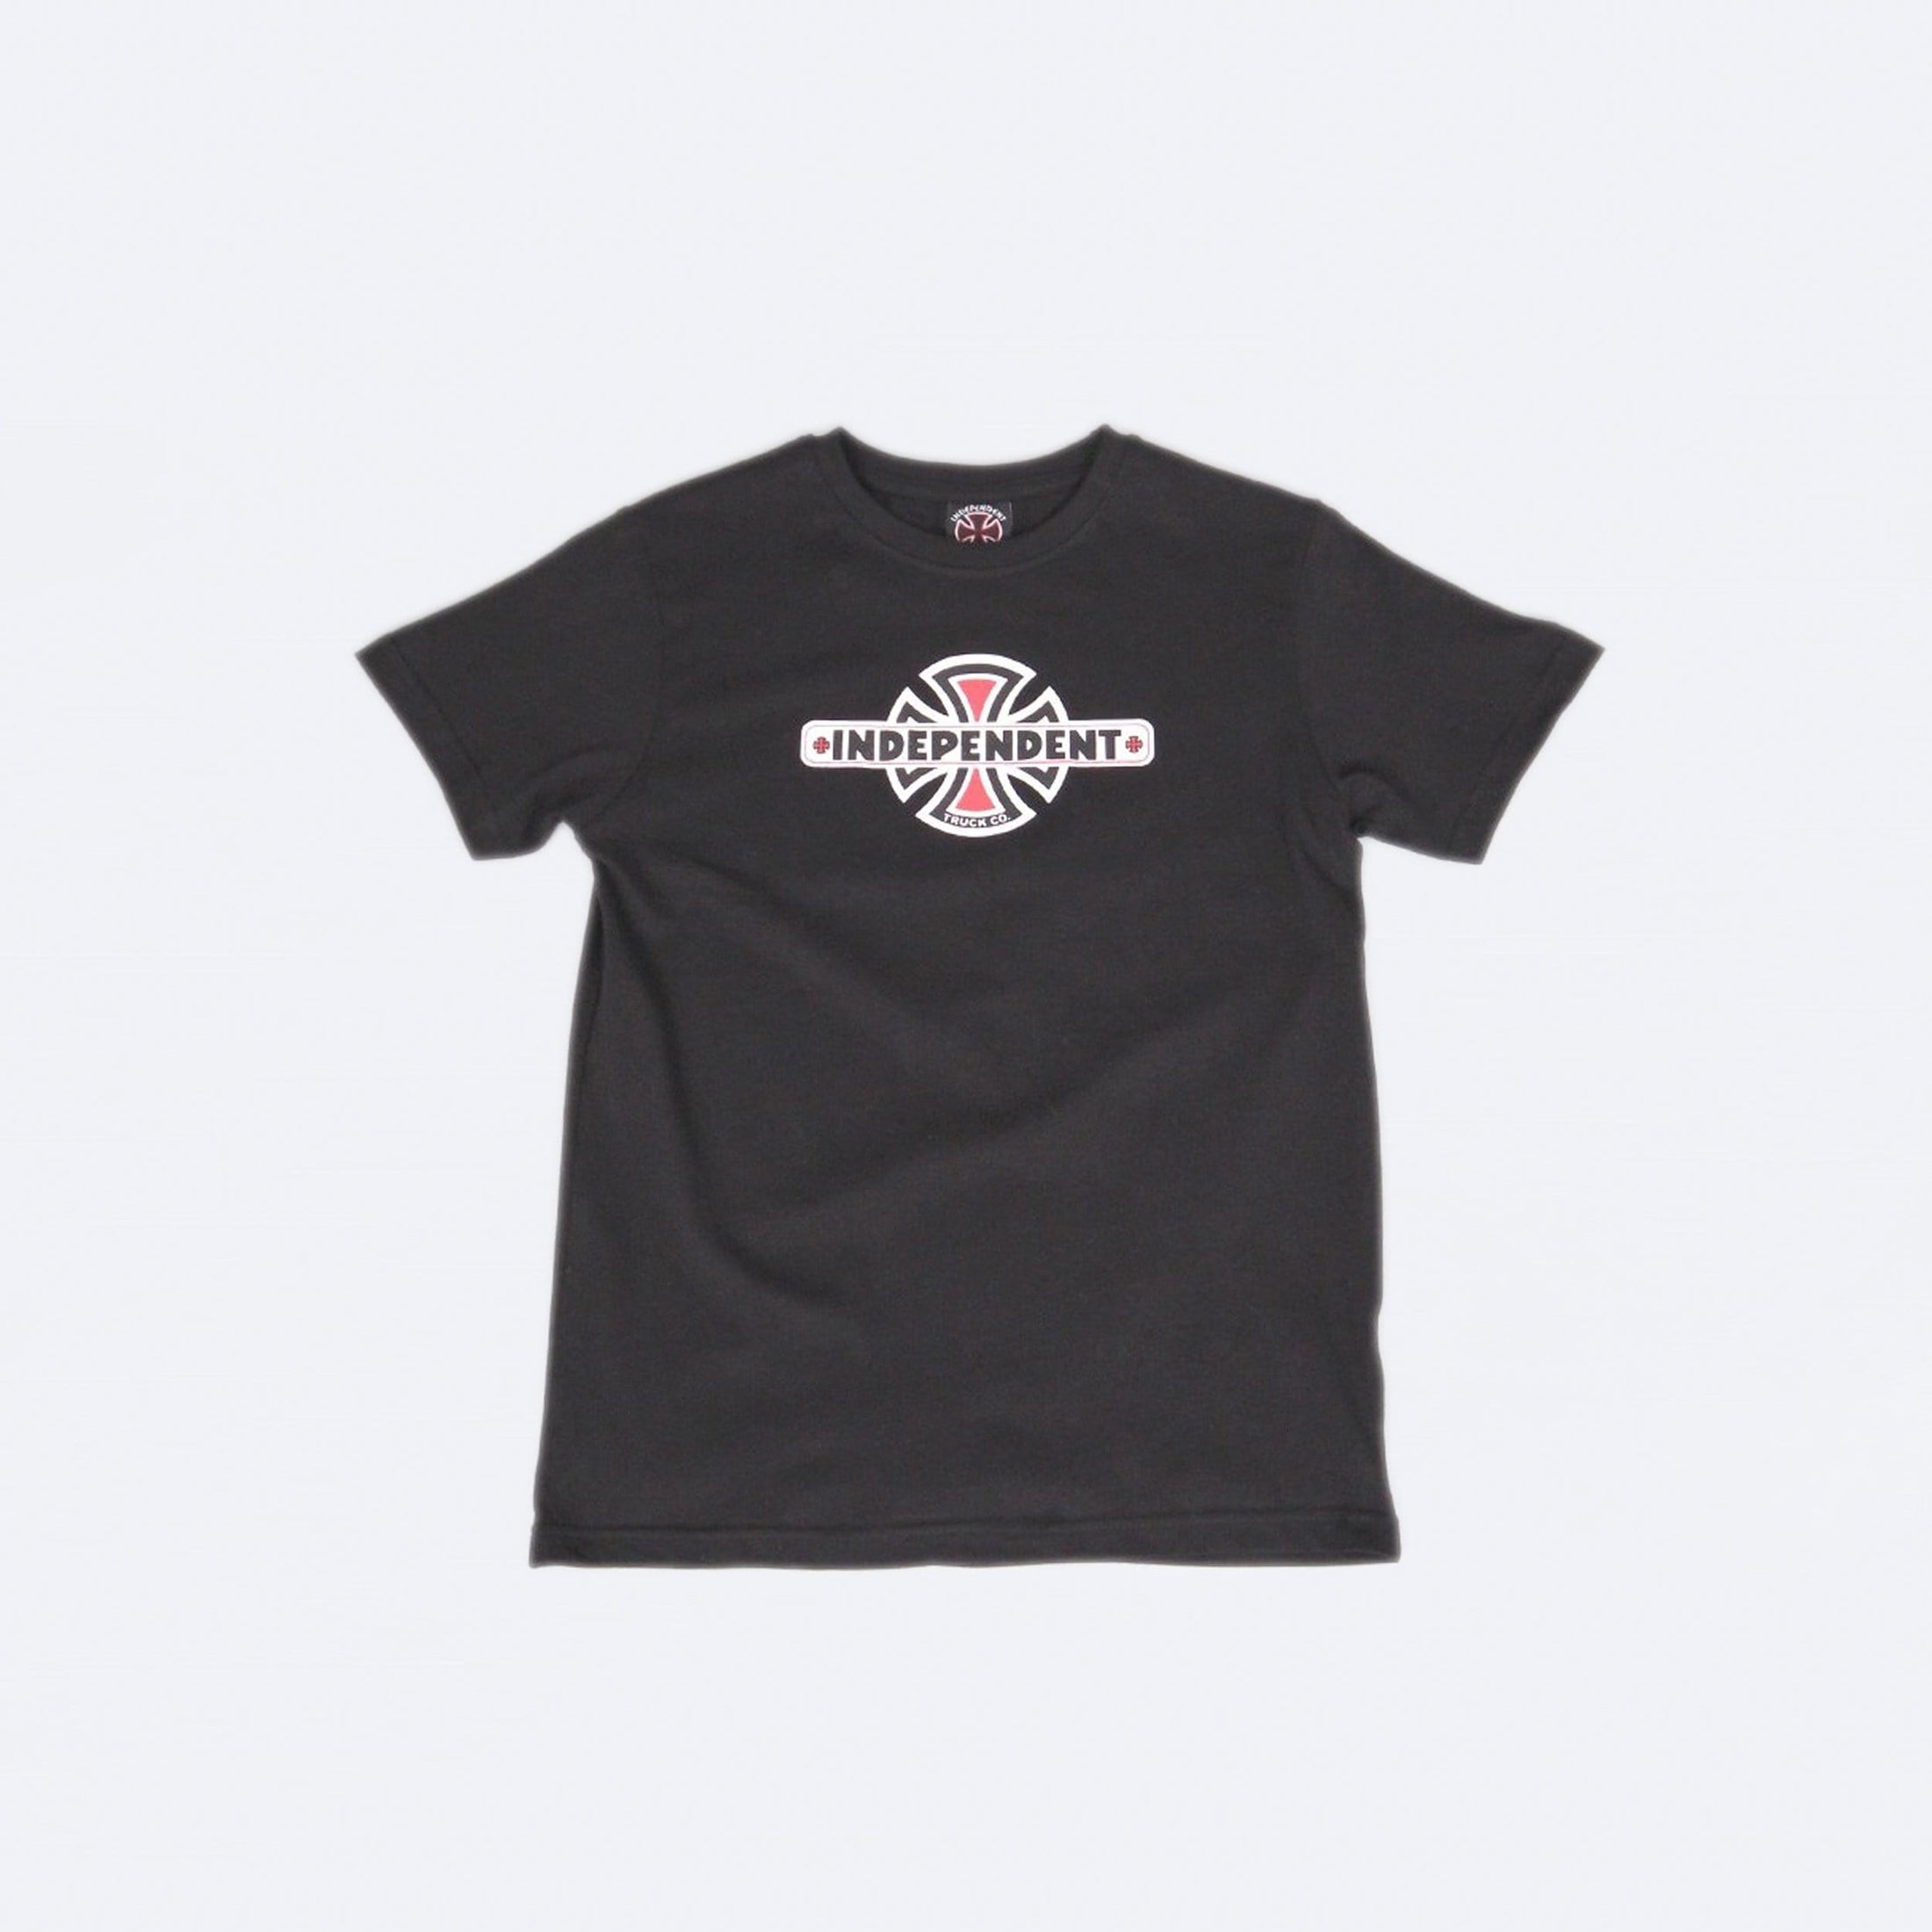 Independent Vintage Cross Youth T-Shirt Black